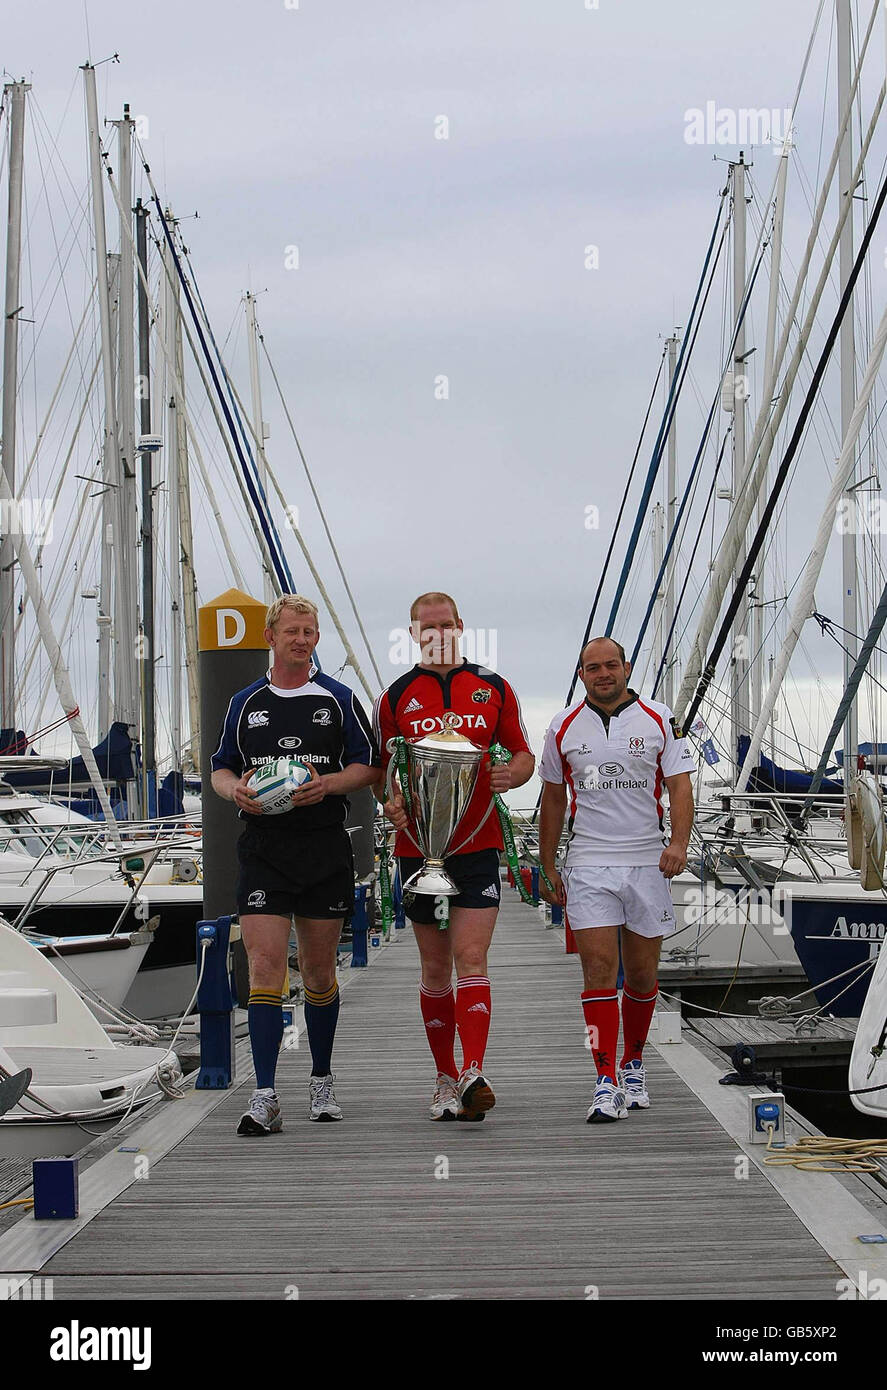 Leinster's Leo Cullen (left) with Munster's Paul O'Connell (centre) Ulster's Rory Best with the Heineken Cup during the Heineken Cup Launch at the marina near Cruzzo Restaurant in Malahide, Dublin, Ireland. Stock Photo